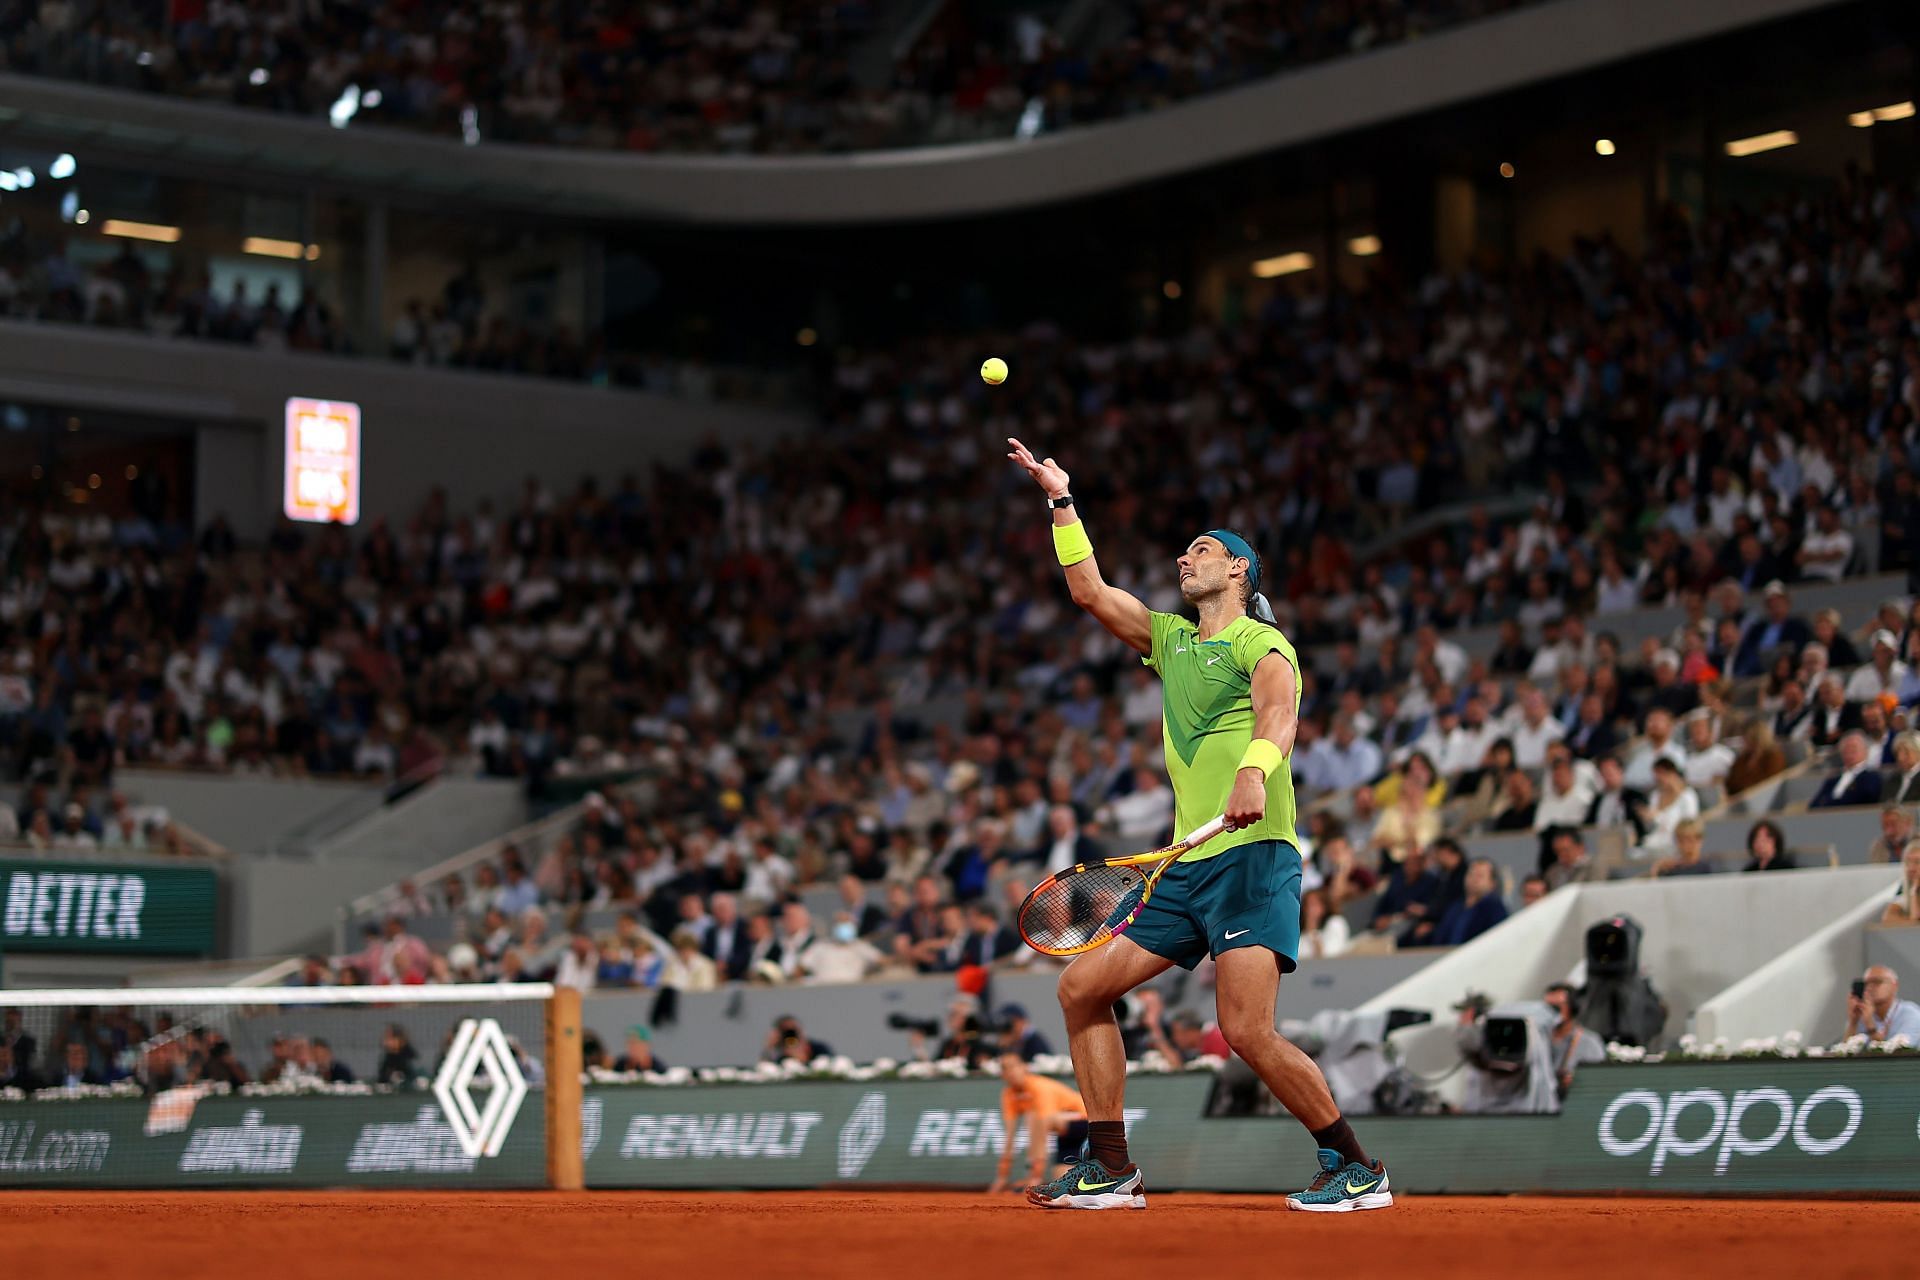 Rafael Nadal proceeded to the French Open final after Alexander Zverev had to retire due to an ankle injury in the semifinals.